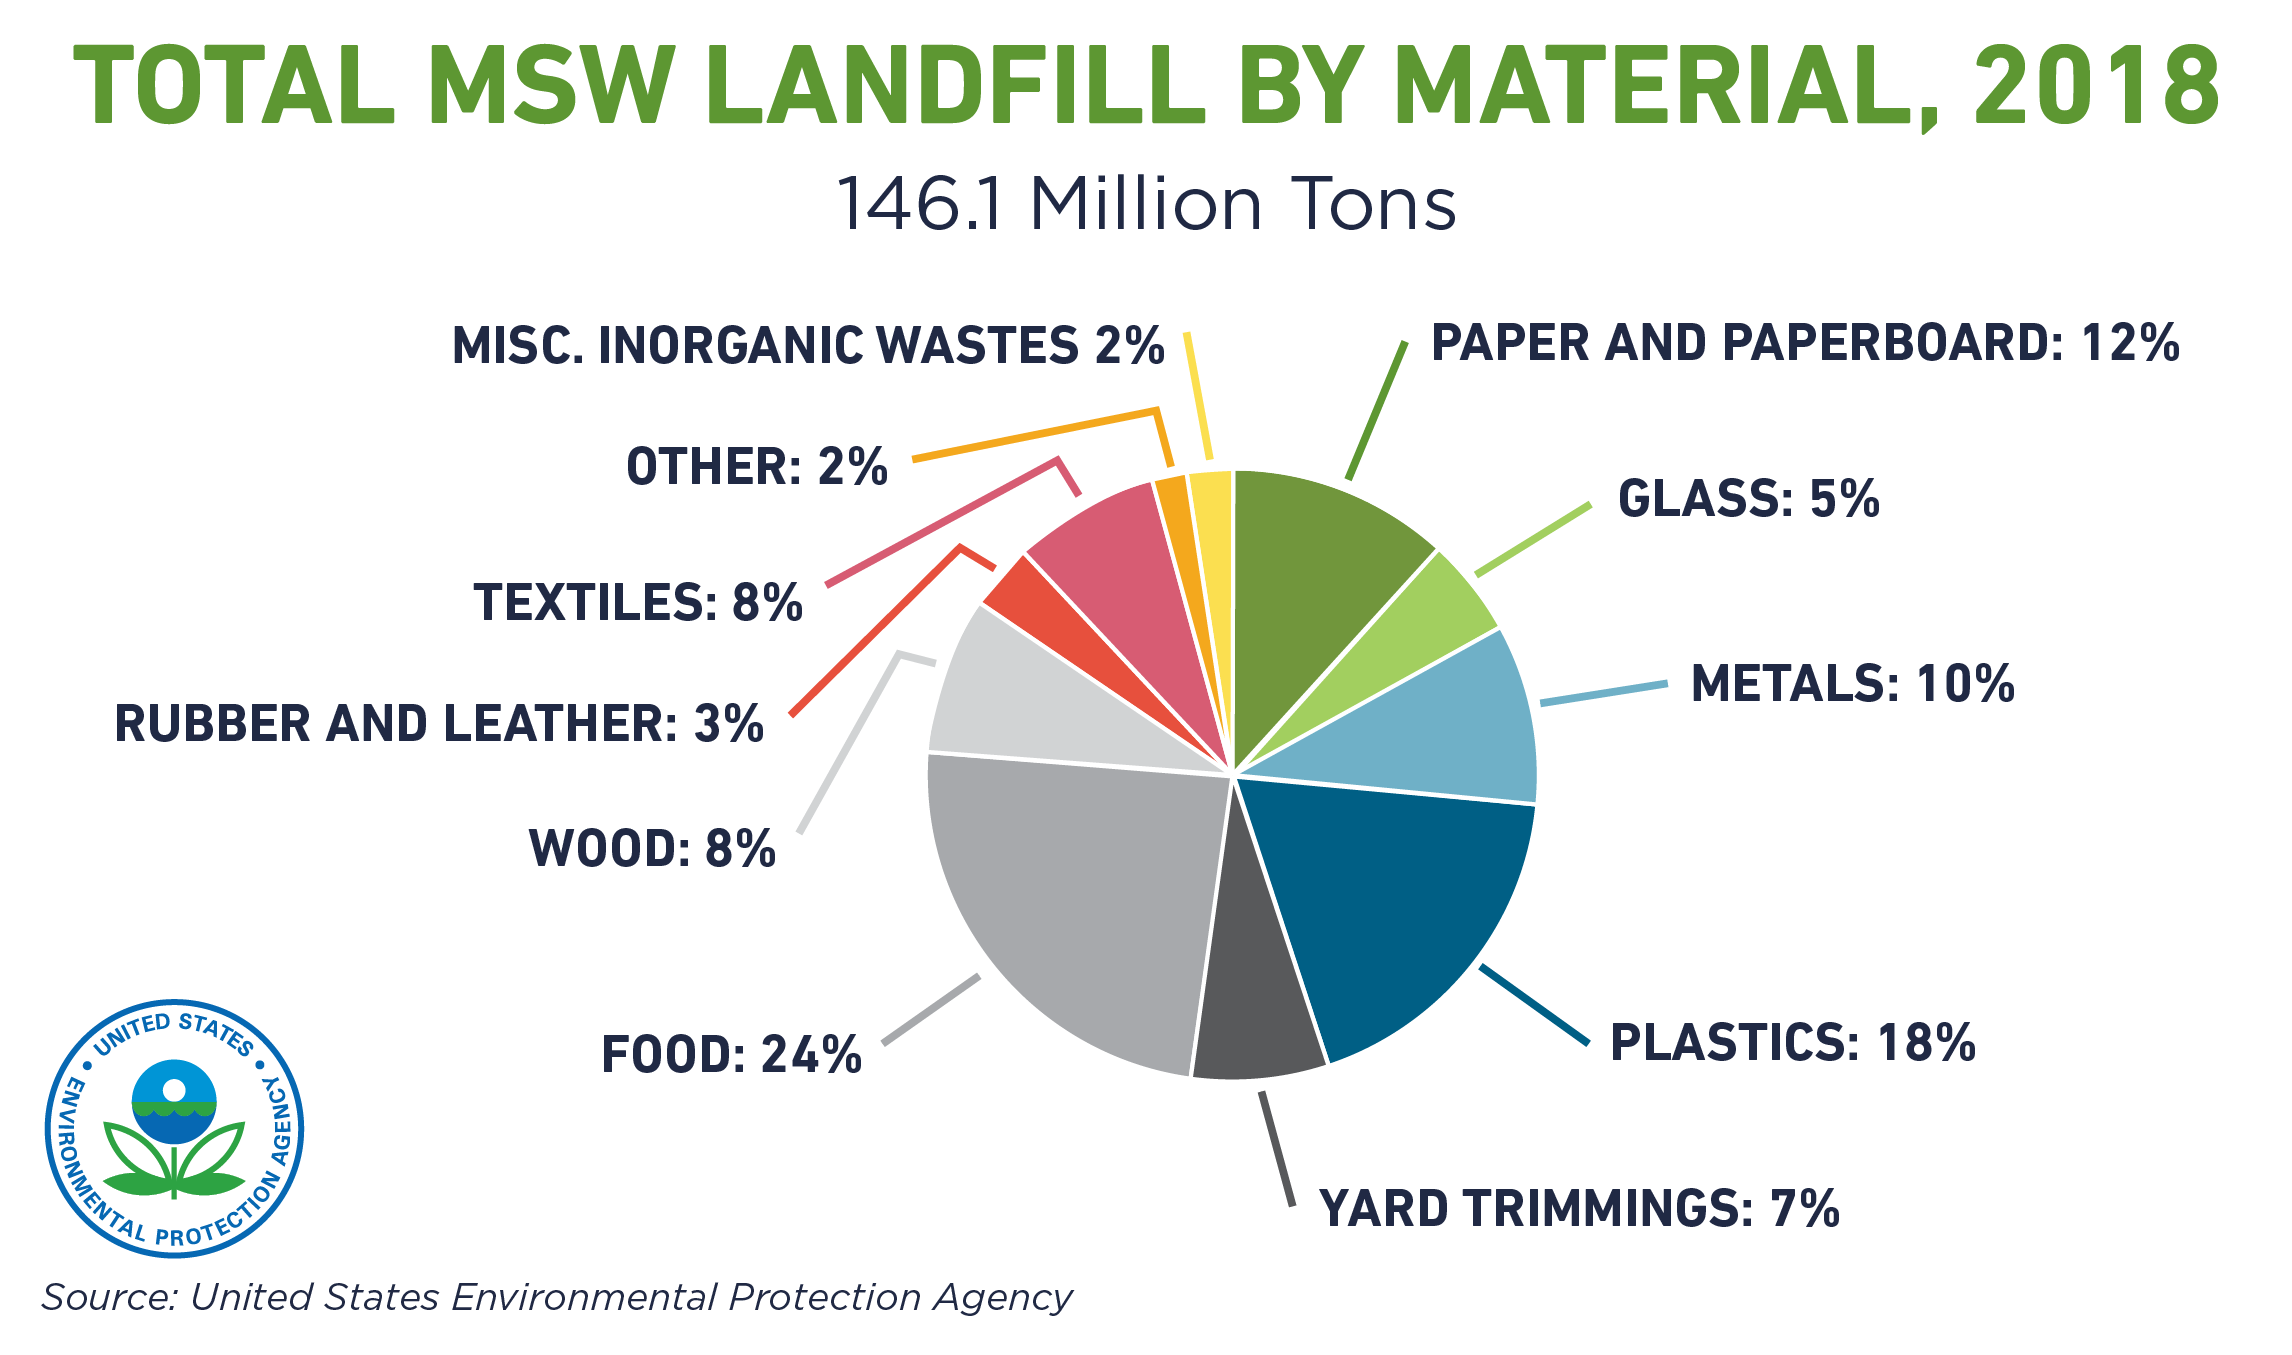 Total Material Solid Waste to Landfill by Material in 2018